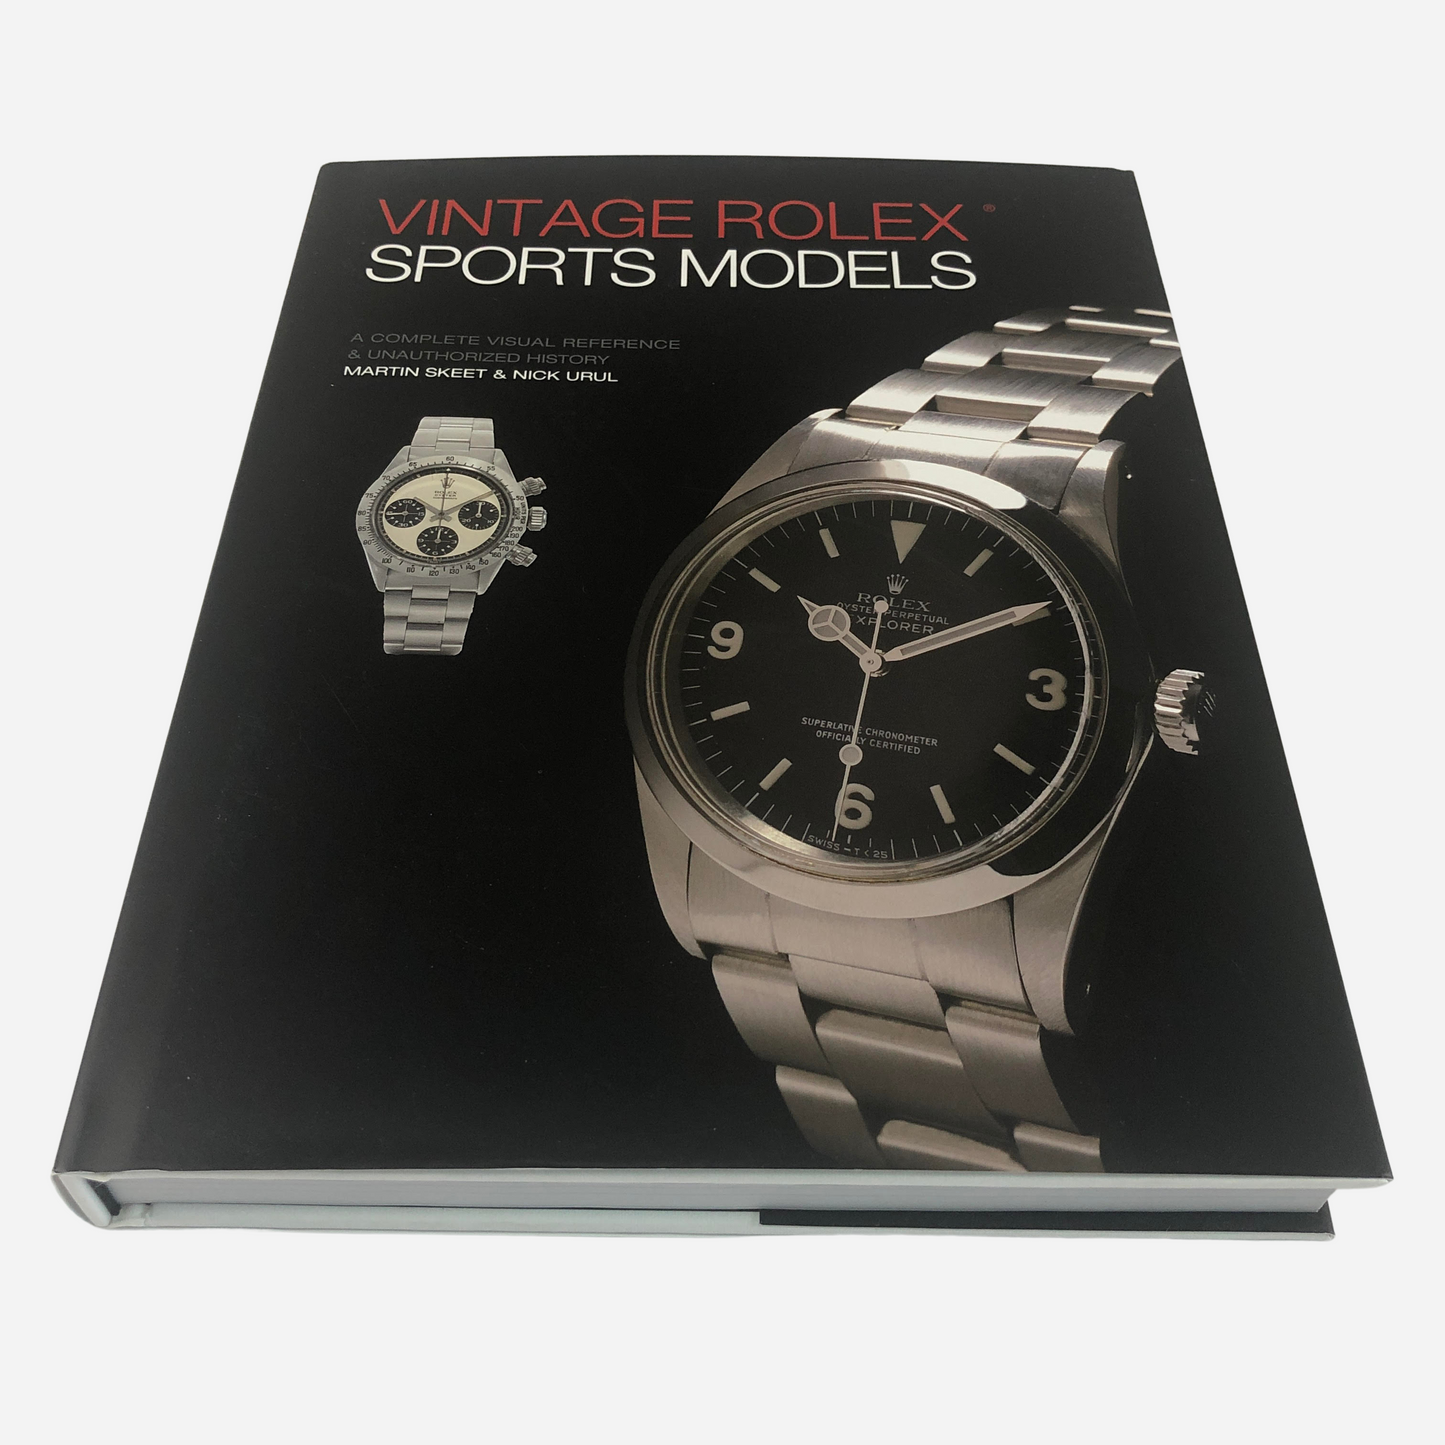 Vintage Rolex Sports Model: A Complete Visual Reference and Unauthorized History (4th Edition)